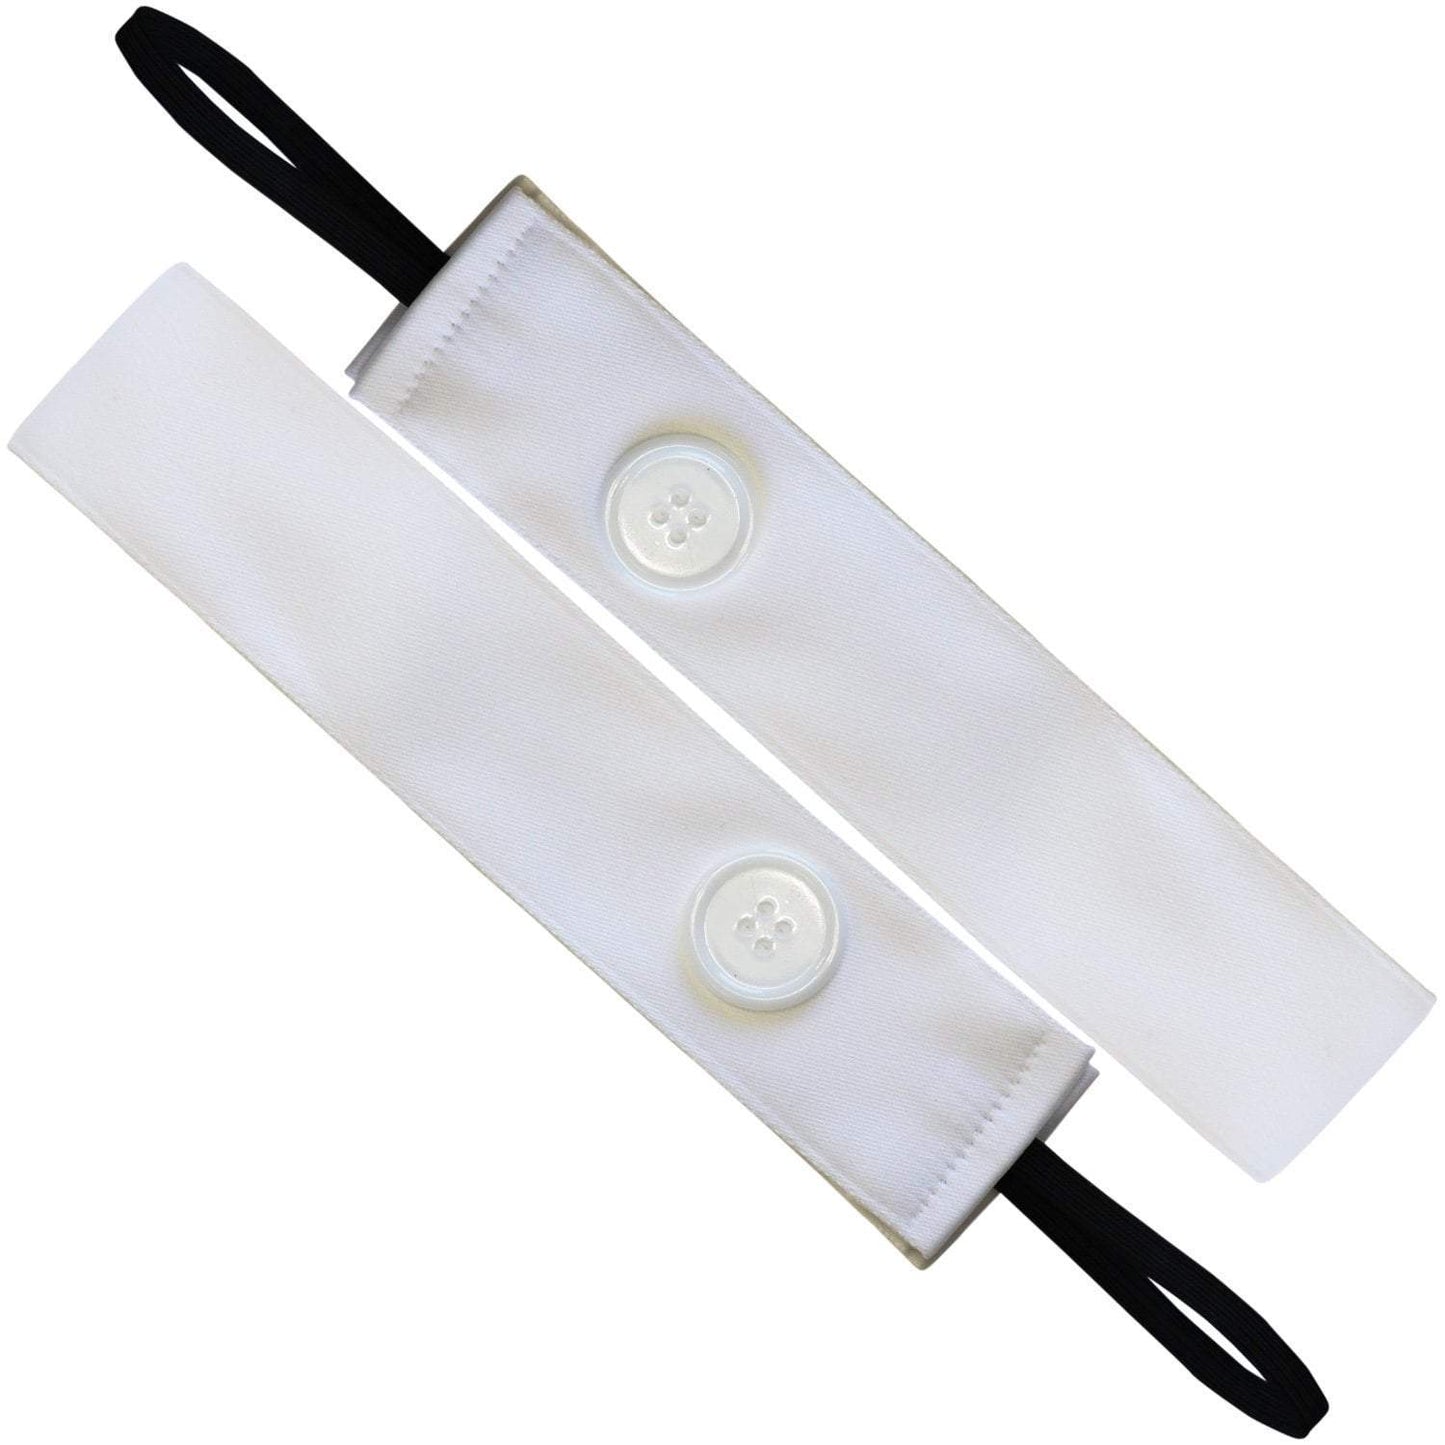 Buttons | Wicked | White | 1.5 Inch Sweaty Bands Non Slip Headband